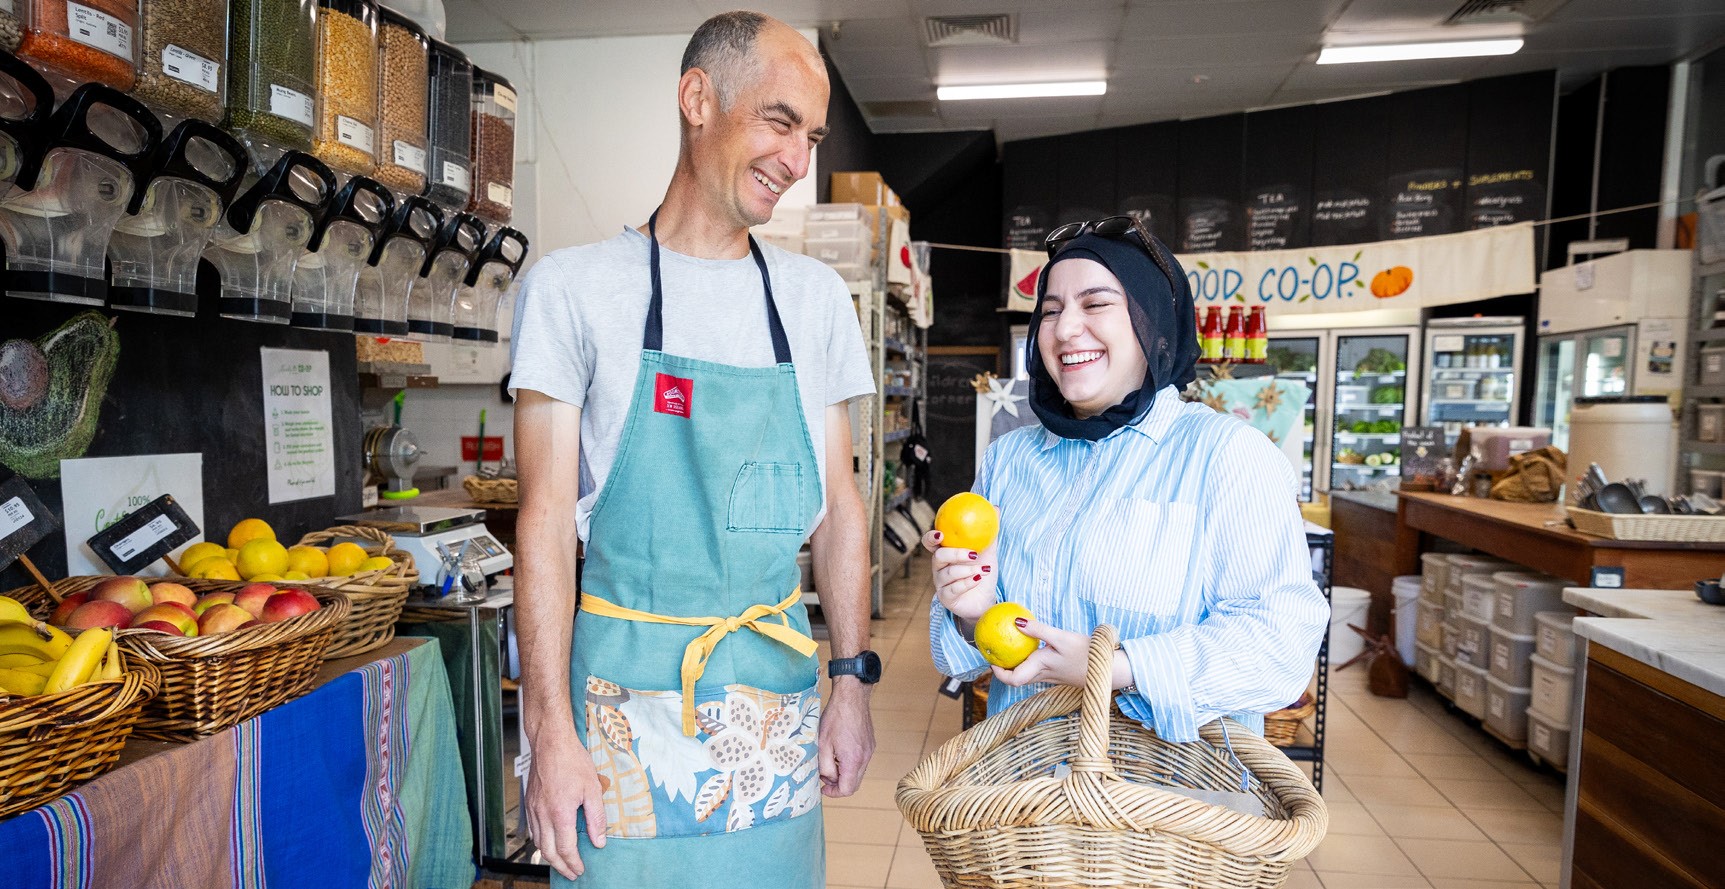 Image of small business owner helping a customer